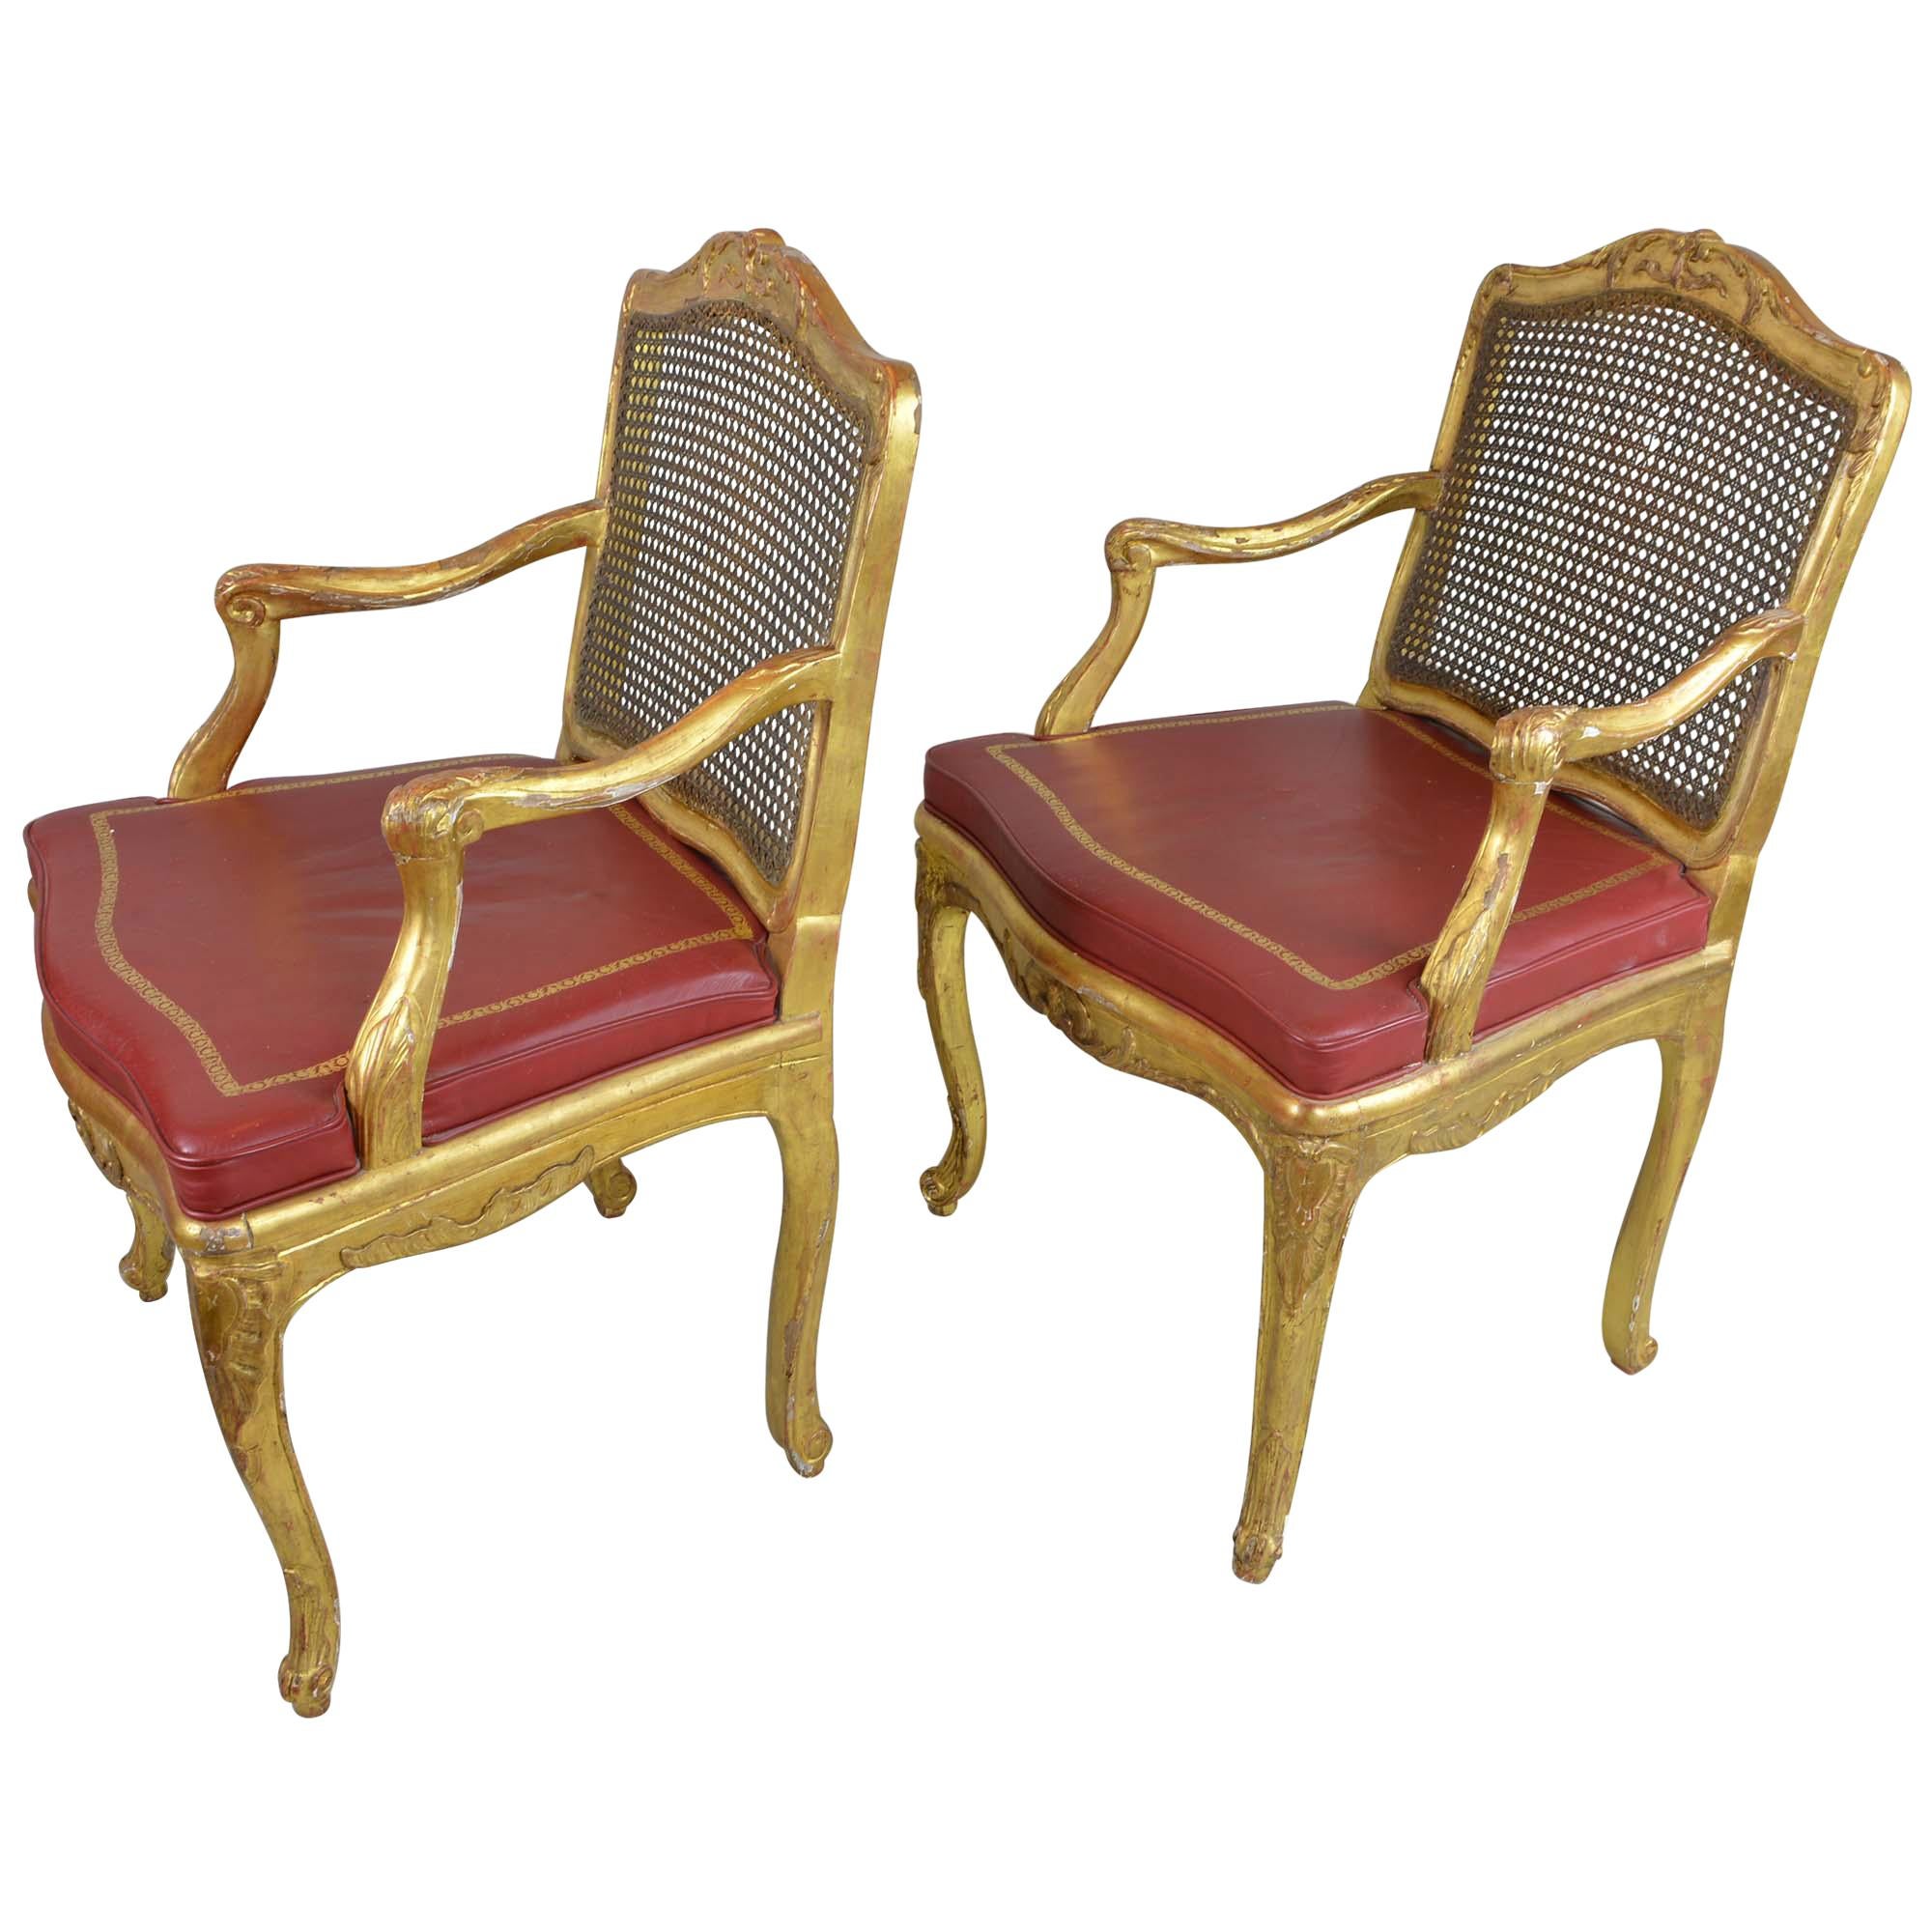 Classic Regency scroll arms of these chairs are in a stunning gold. Leather cushions have gold accents adding to the richness. There backs feature the cane detail - small hole in caning in one. The chairs are of a fine design but are in excellent